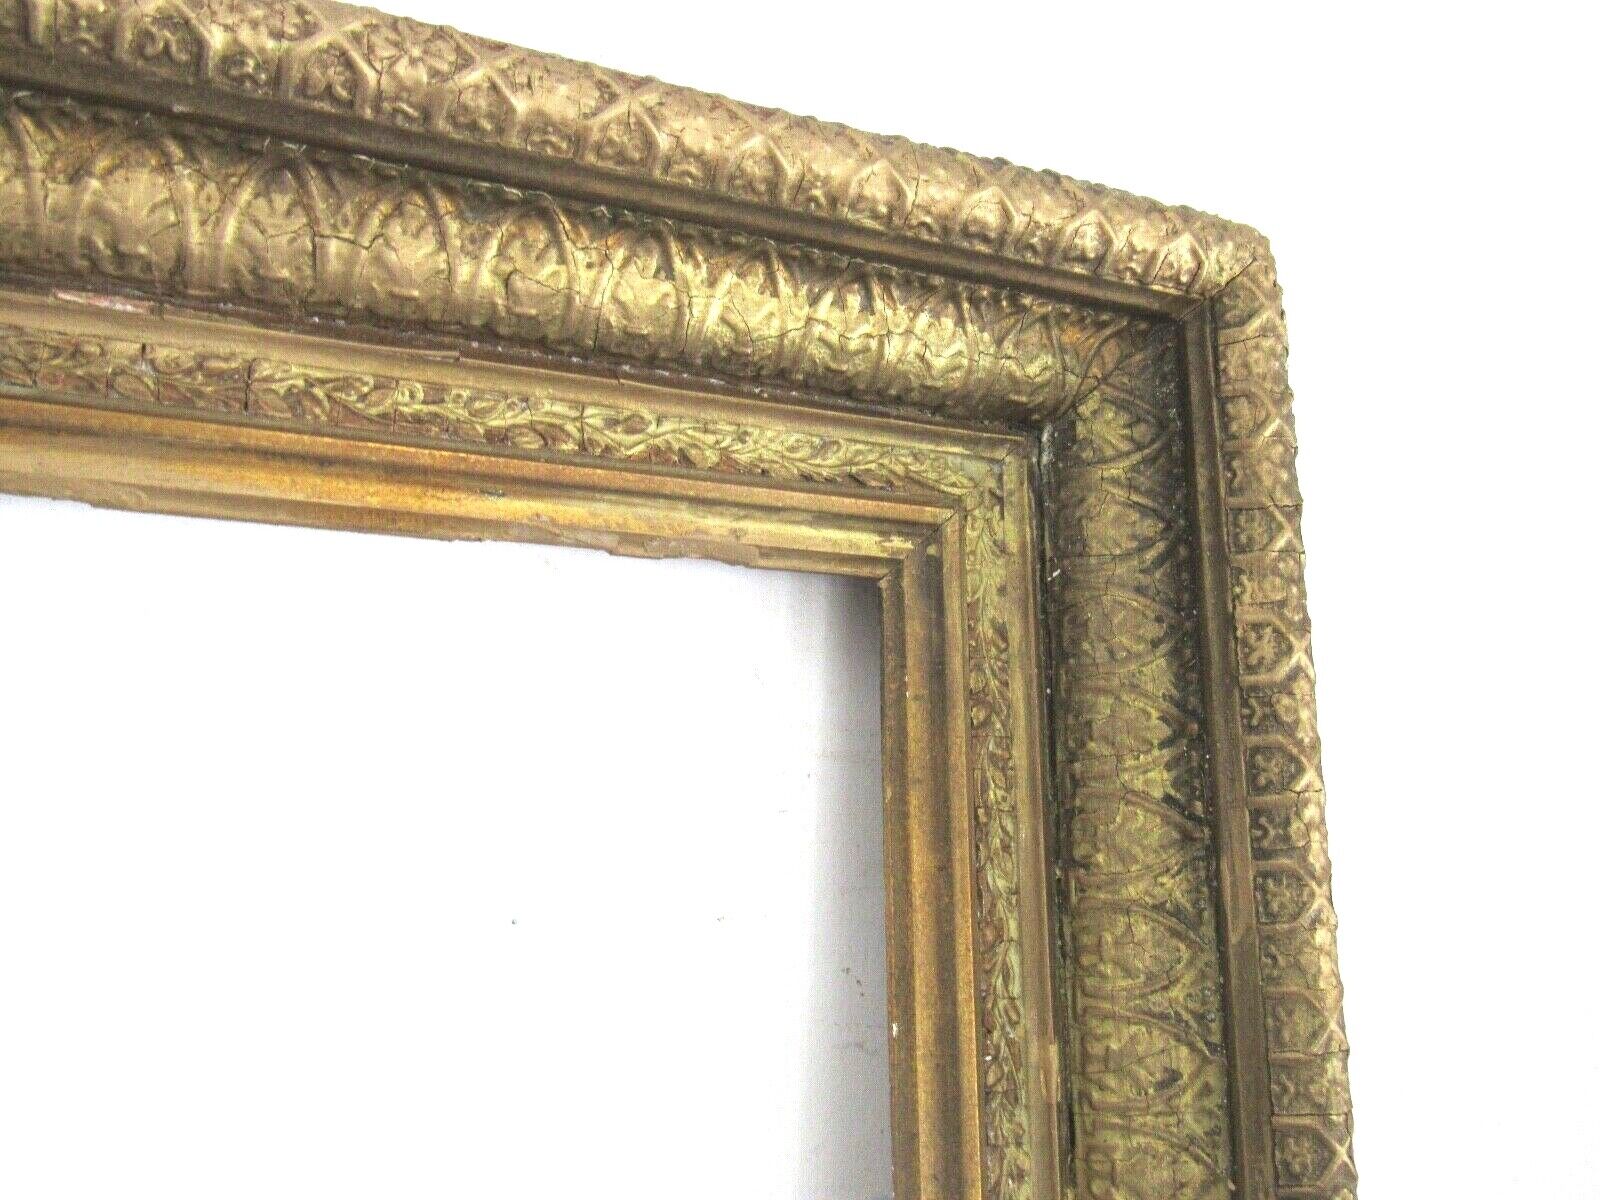 ANTIQUE  19 c  GREAT QUALITY GILT FRAME FOR PAINTING  28  x  22  (k-2)